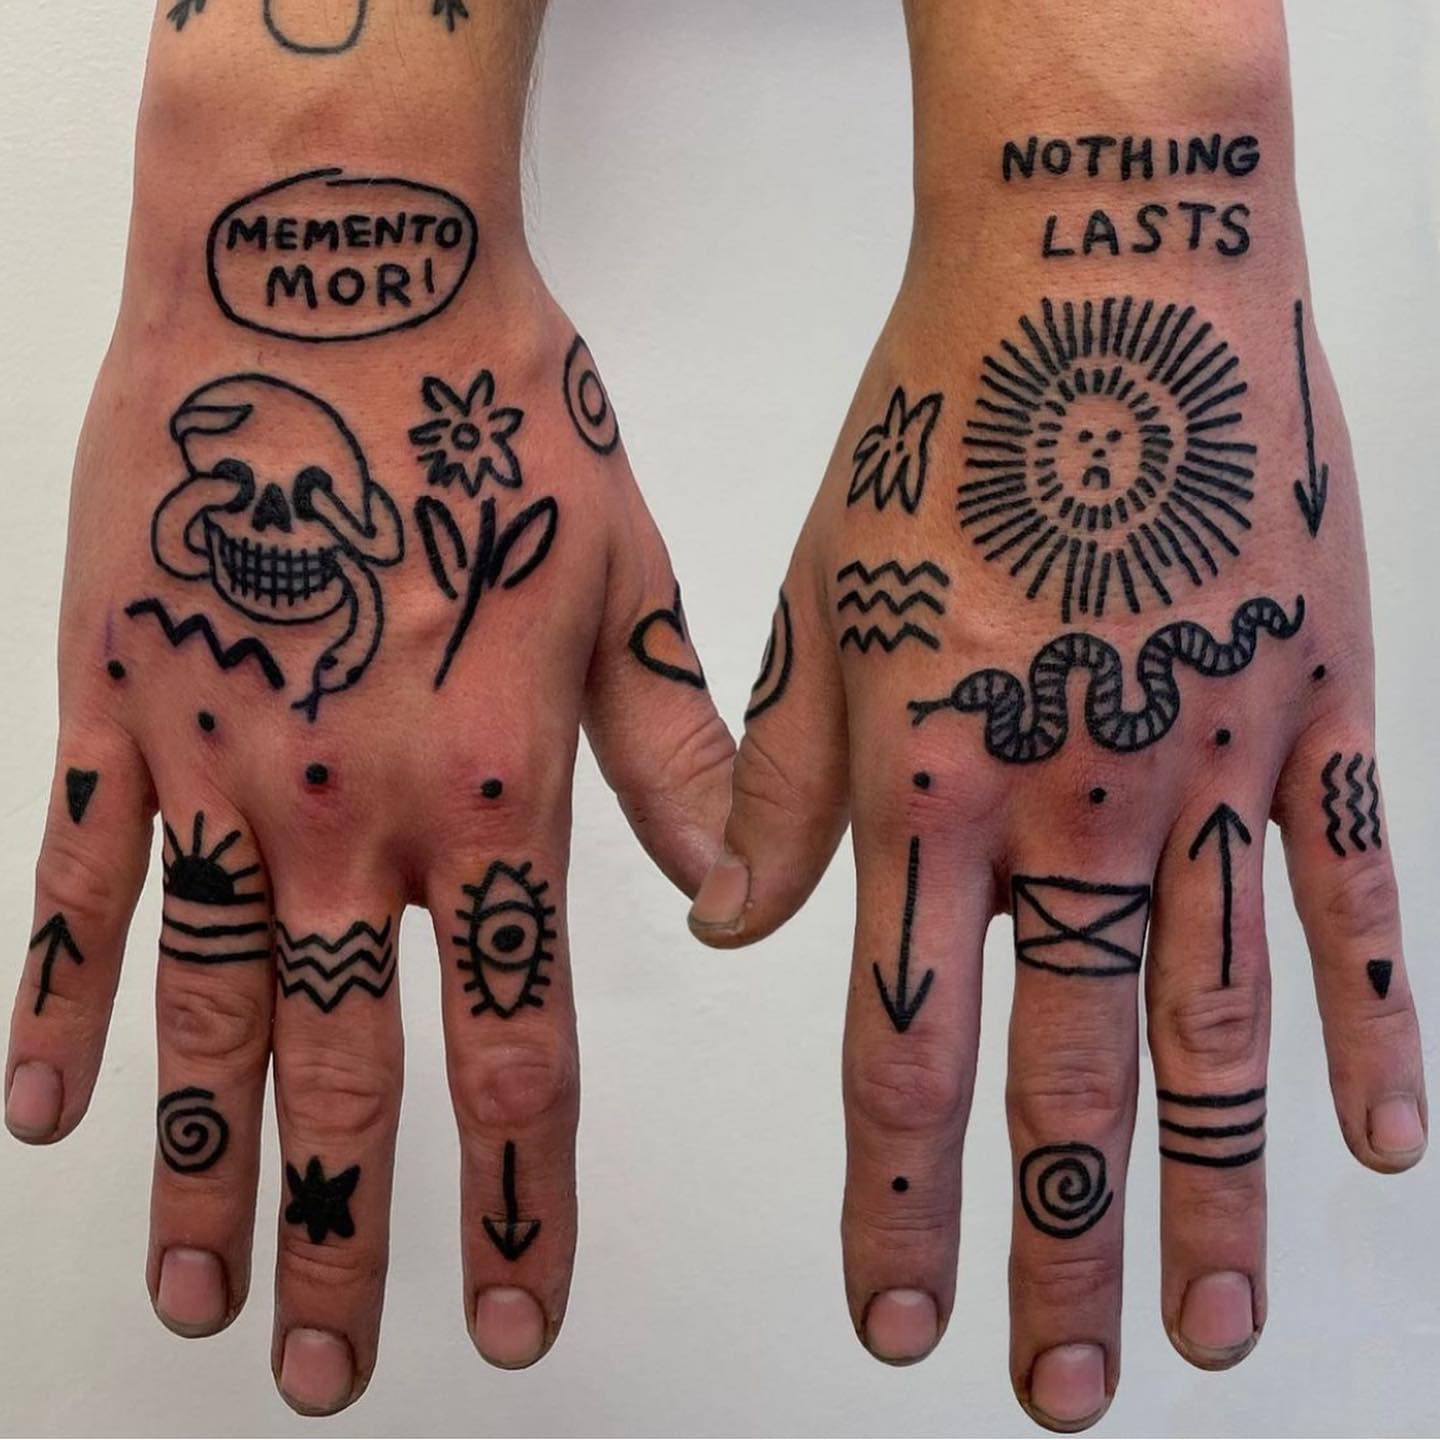 This Tattoo Artist Inks Whatever He Wants on His Clients